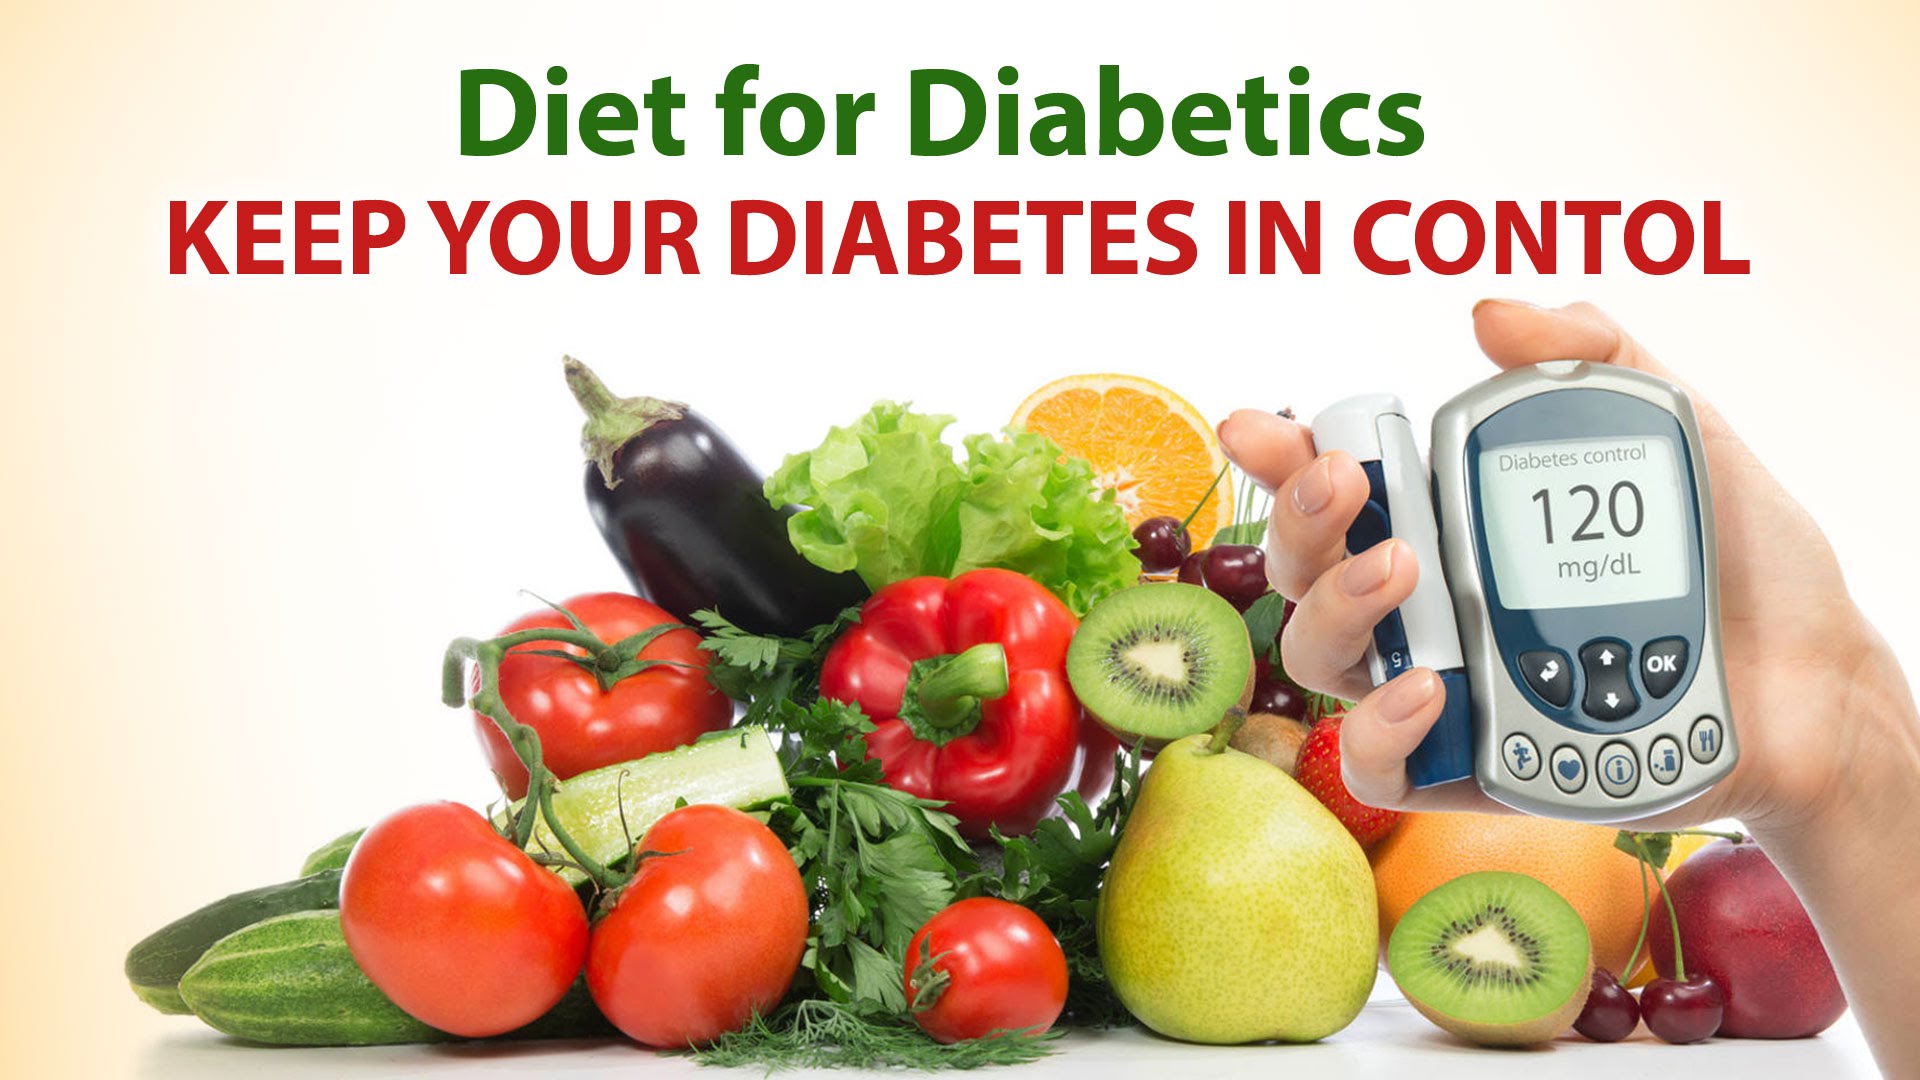 What Is a Healthy, Balanced Diet For Diabetes?